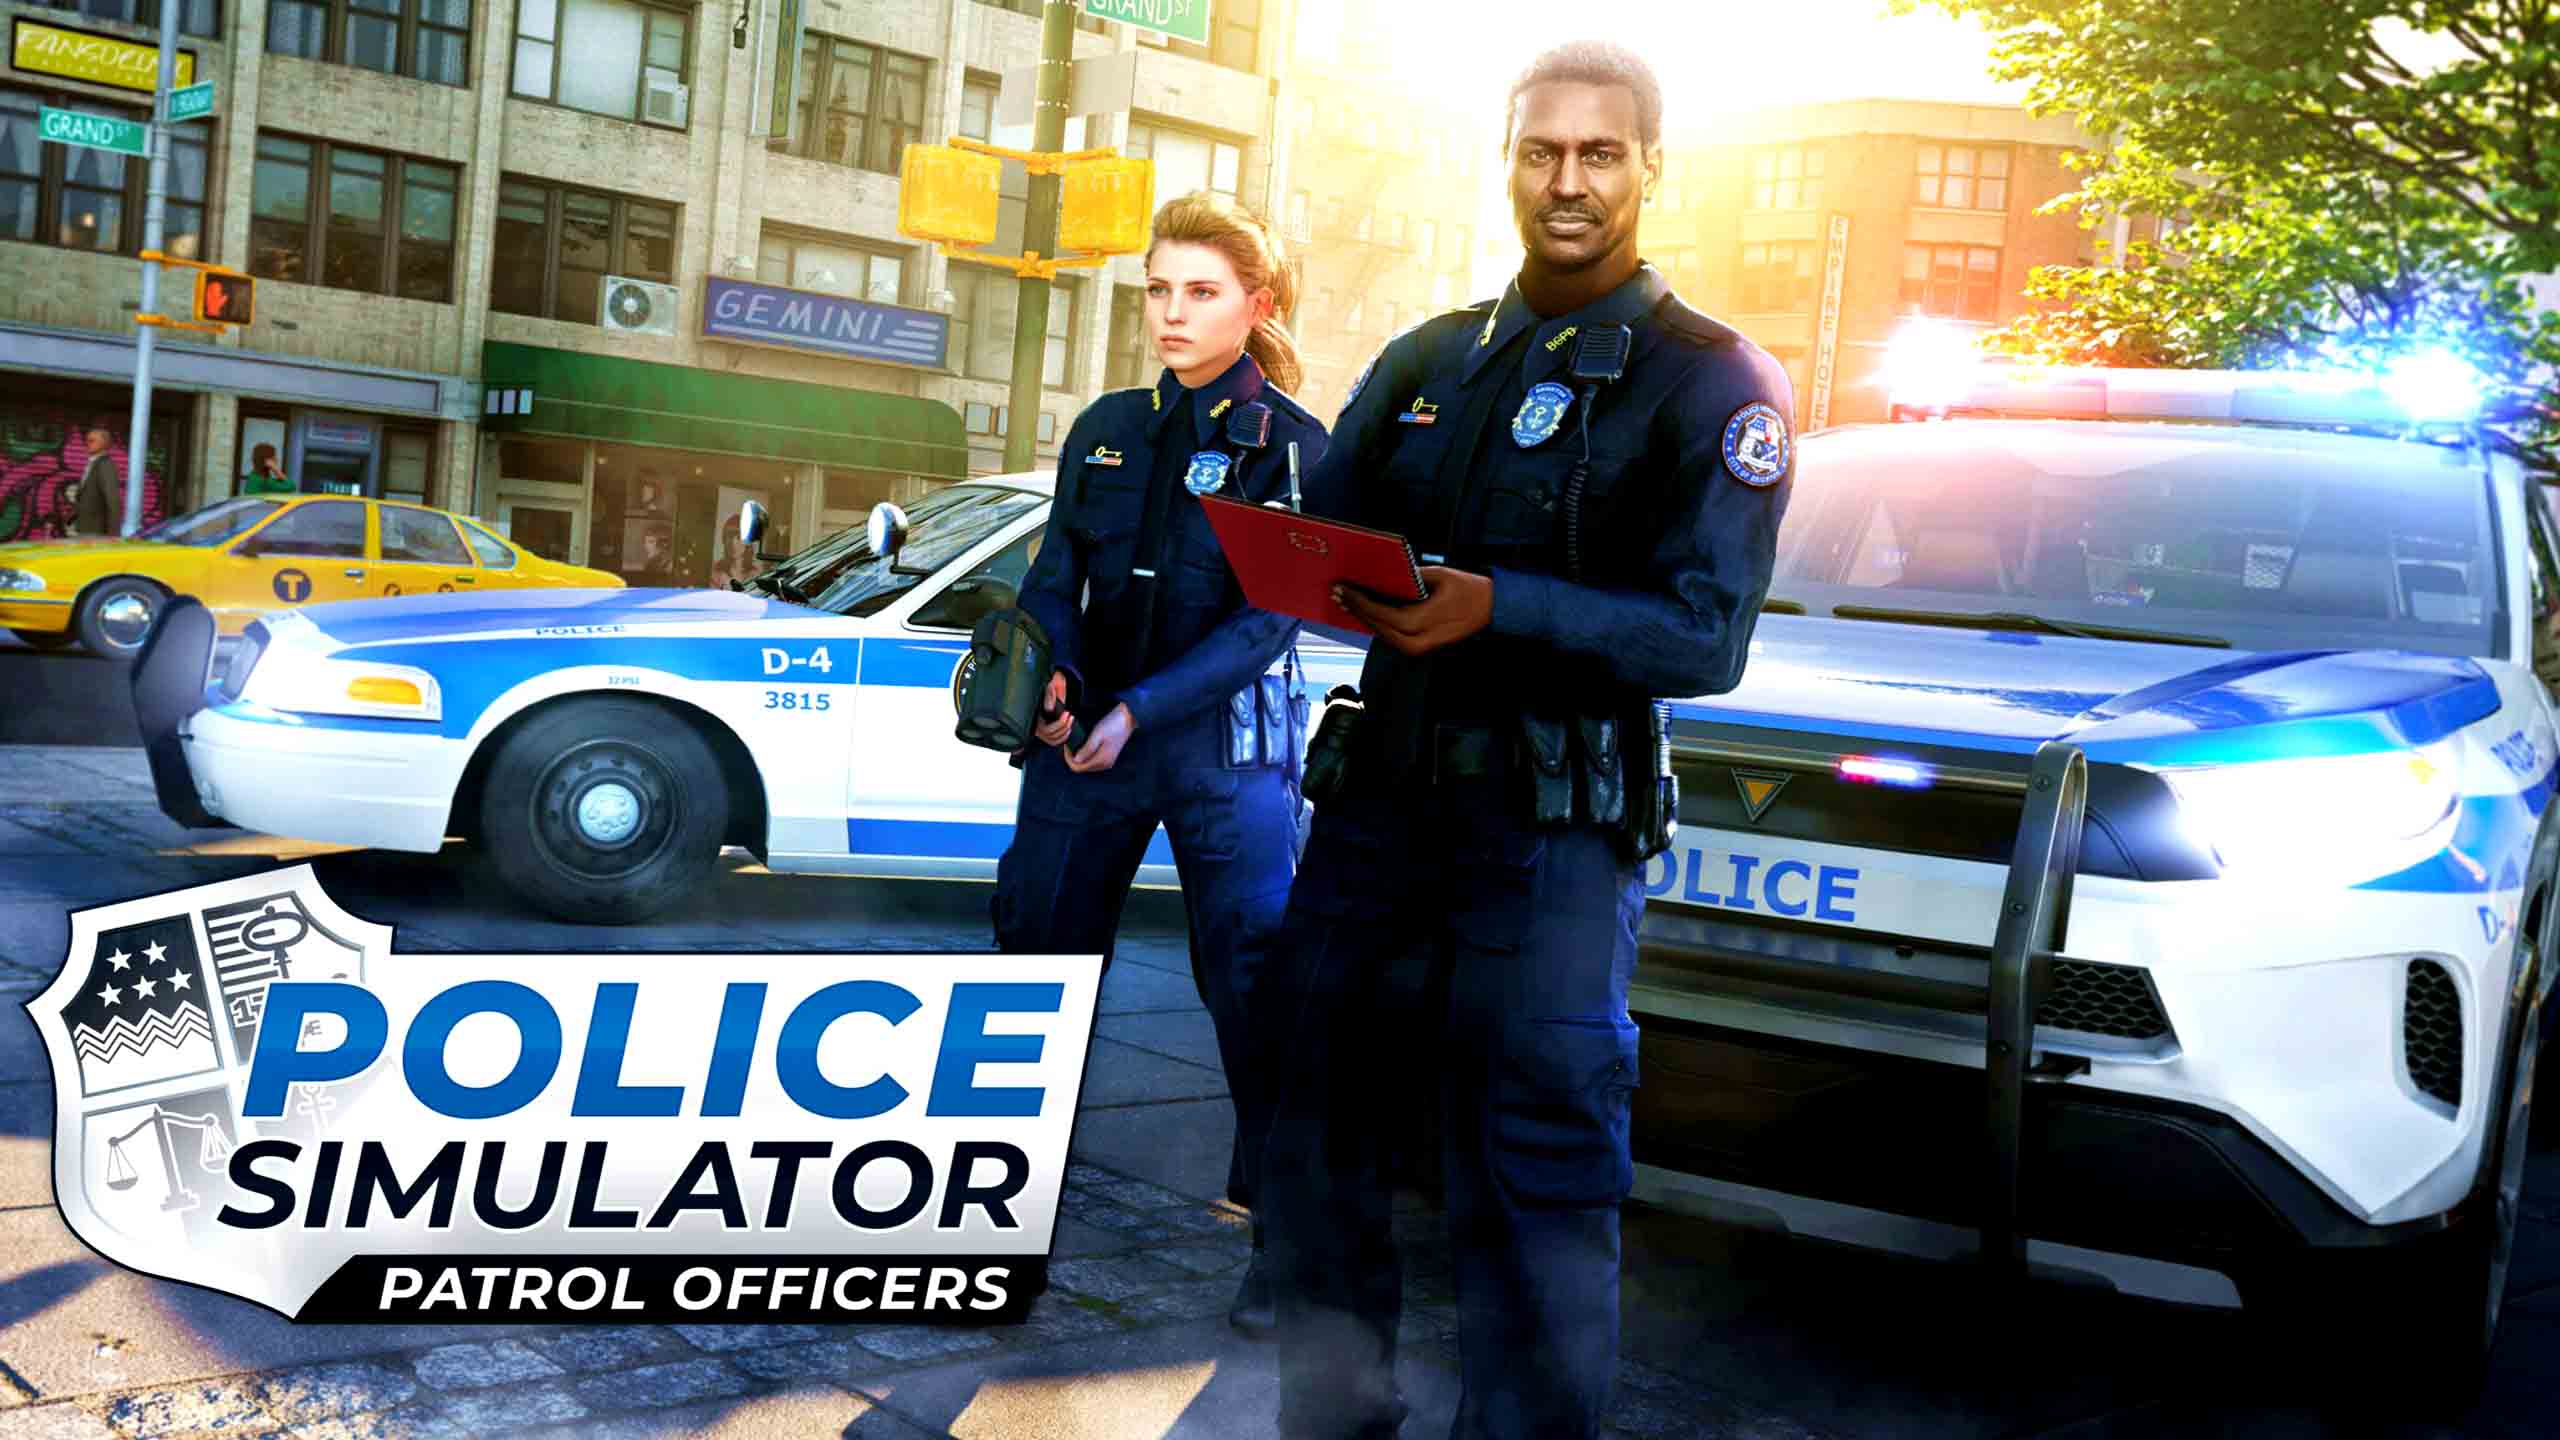 police-simulator-patrol-officers-police-simulation-soon-to-be-released-for-consoles